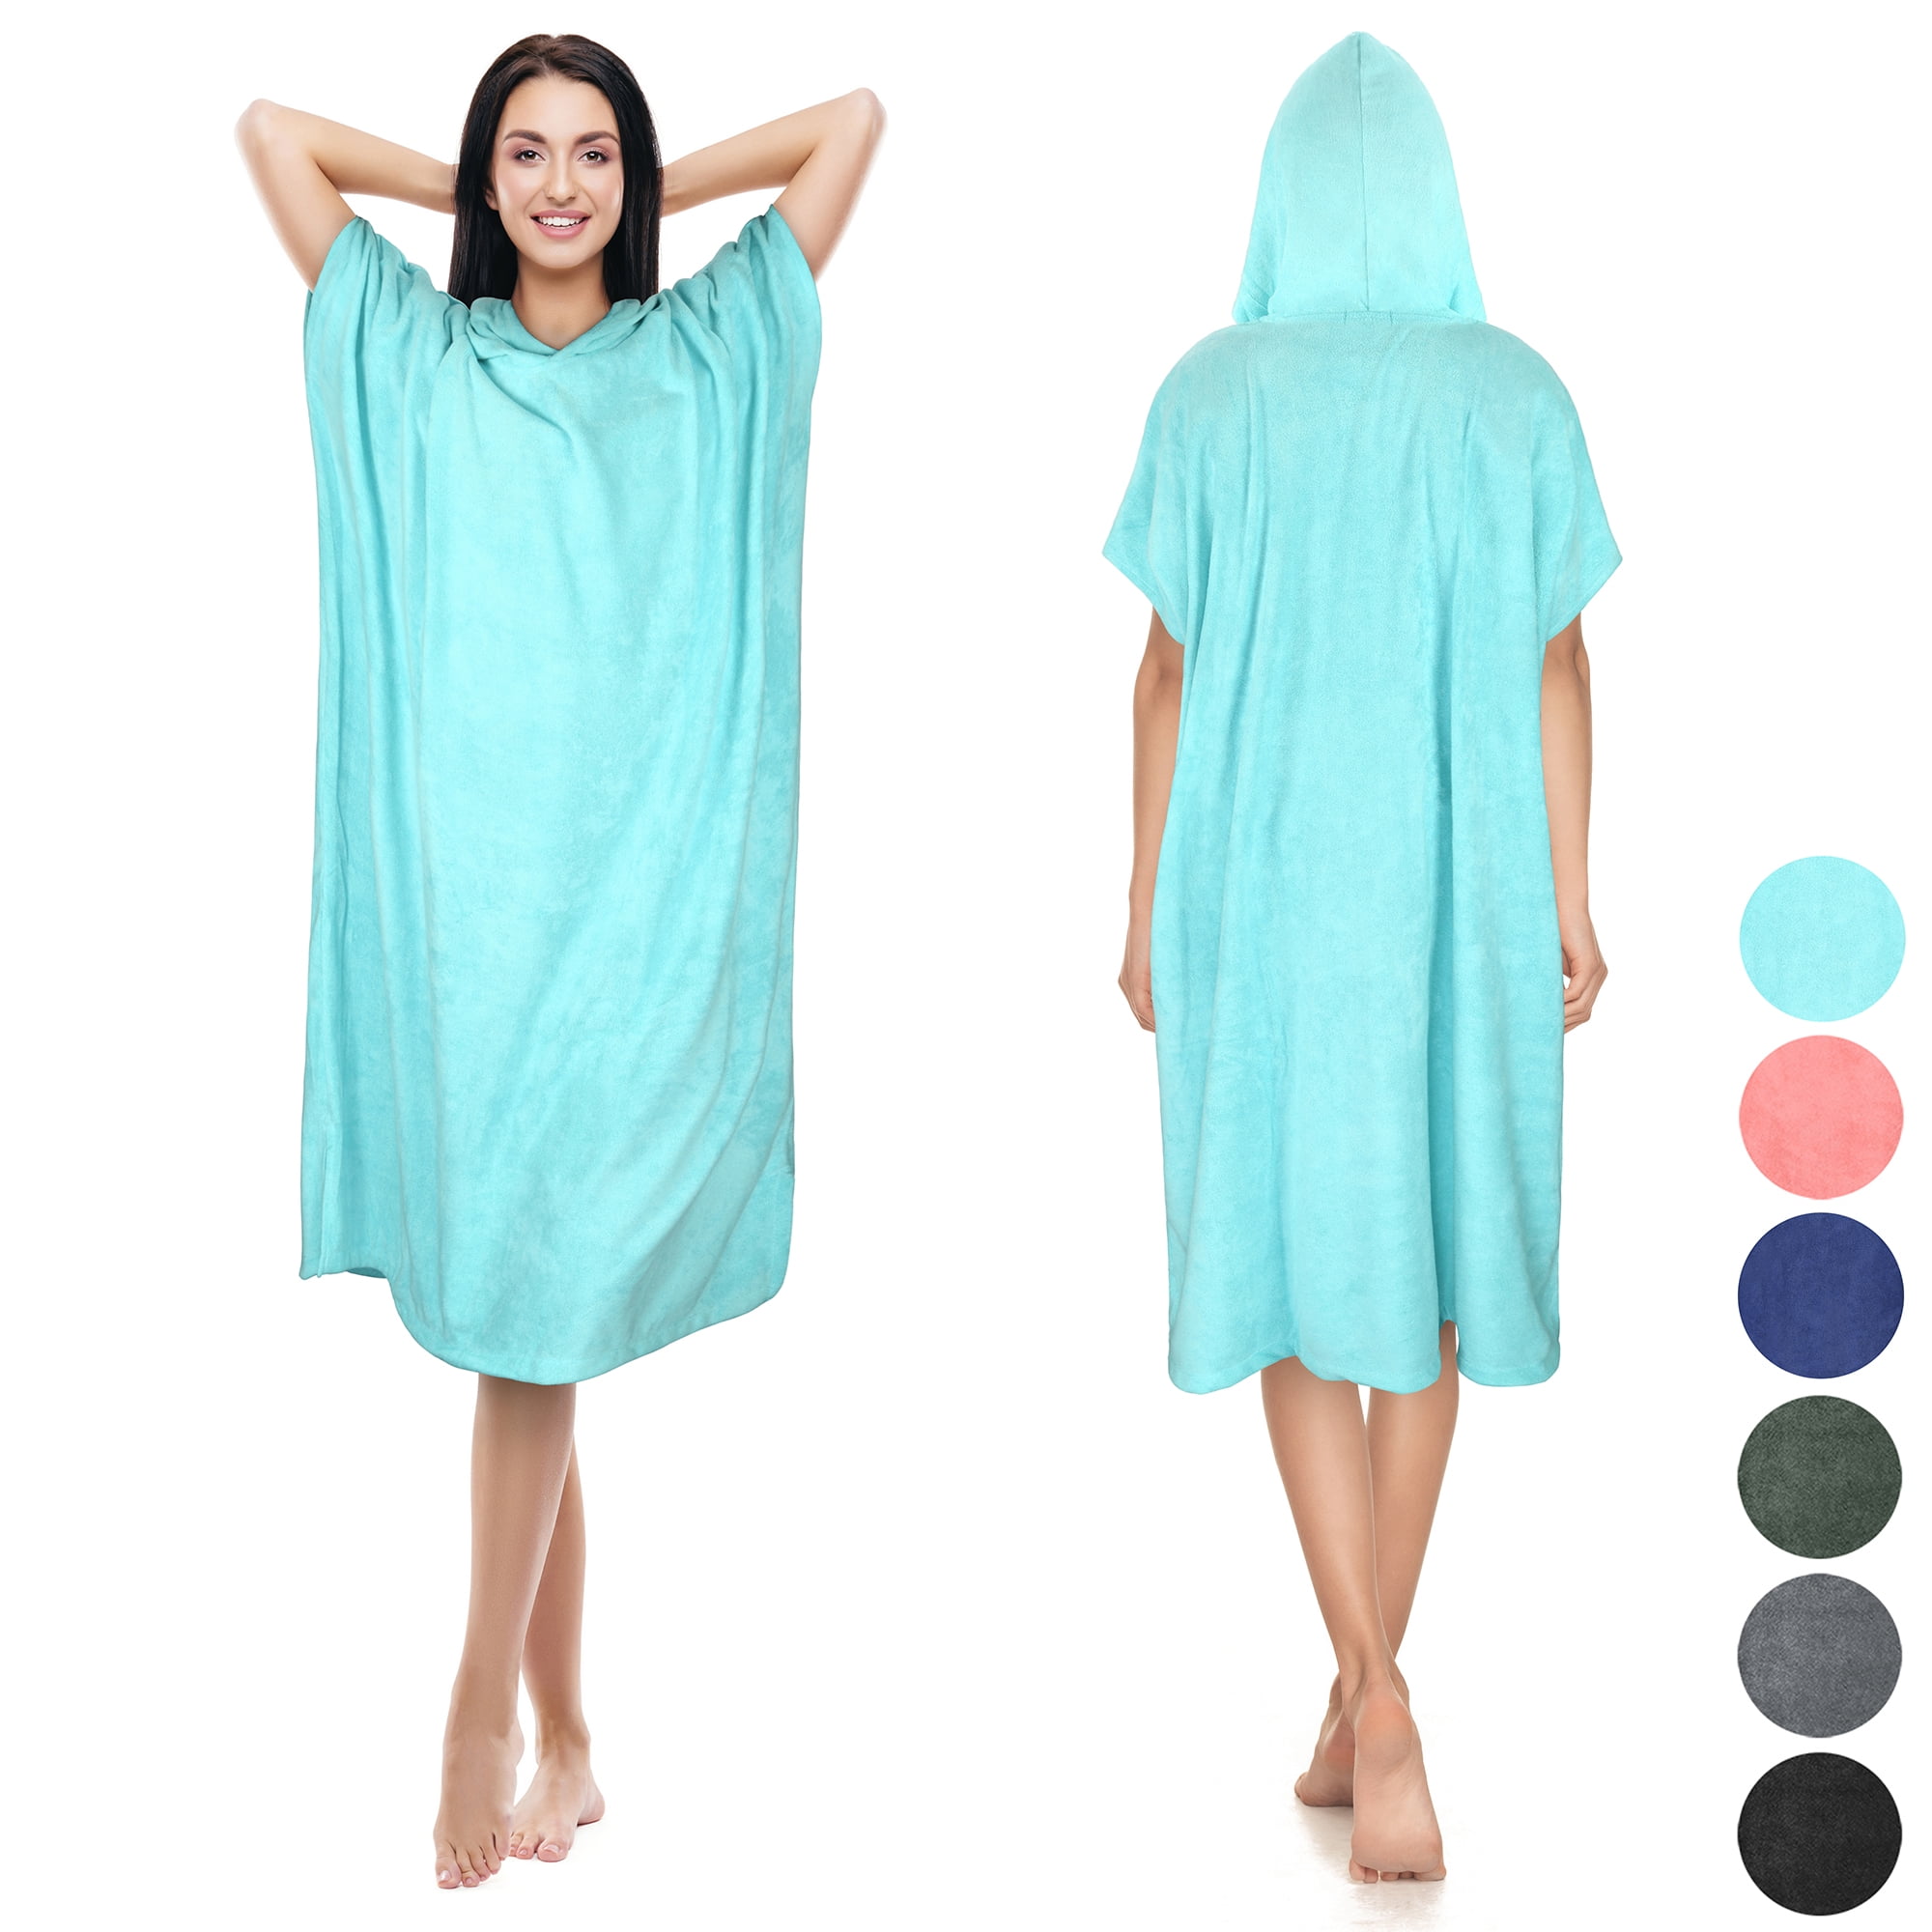 SUN CUBE Surf Poncho Changing Robe with Hood, Thick Quick Dry Microfiber  Wetsuit Changing Towel for Surfing Beach Swim Outdoor Sports Women,  Absorbent Wearable Towel Cover Up with Pocket, Light Blue 